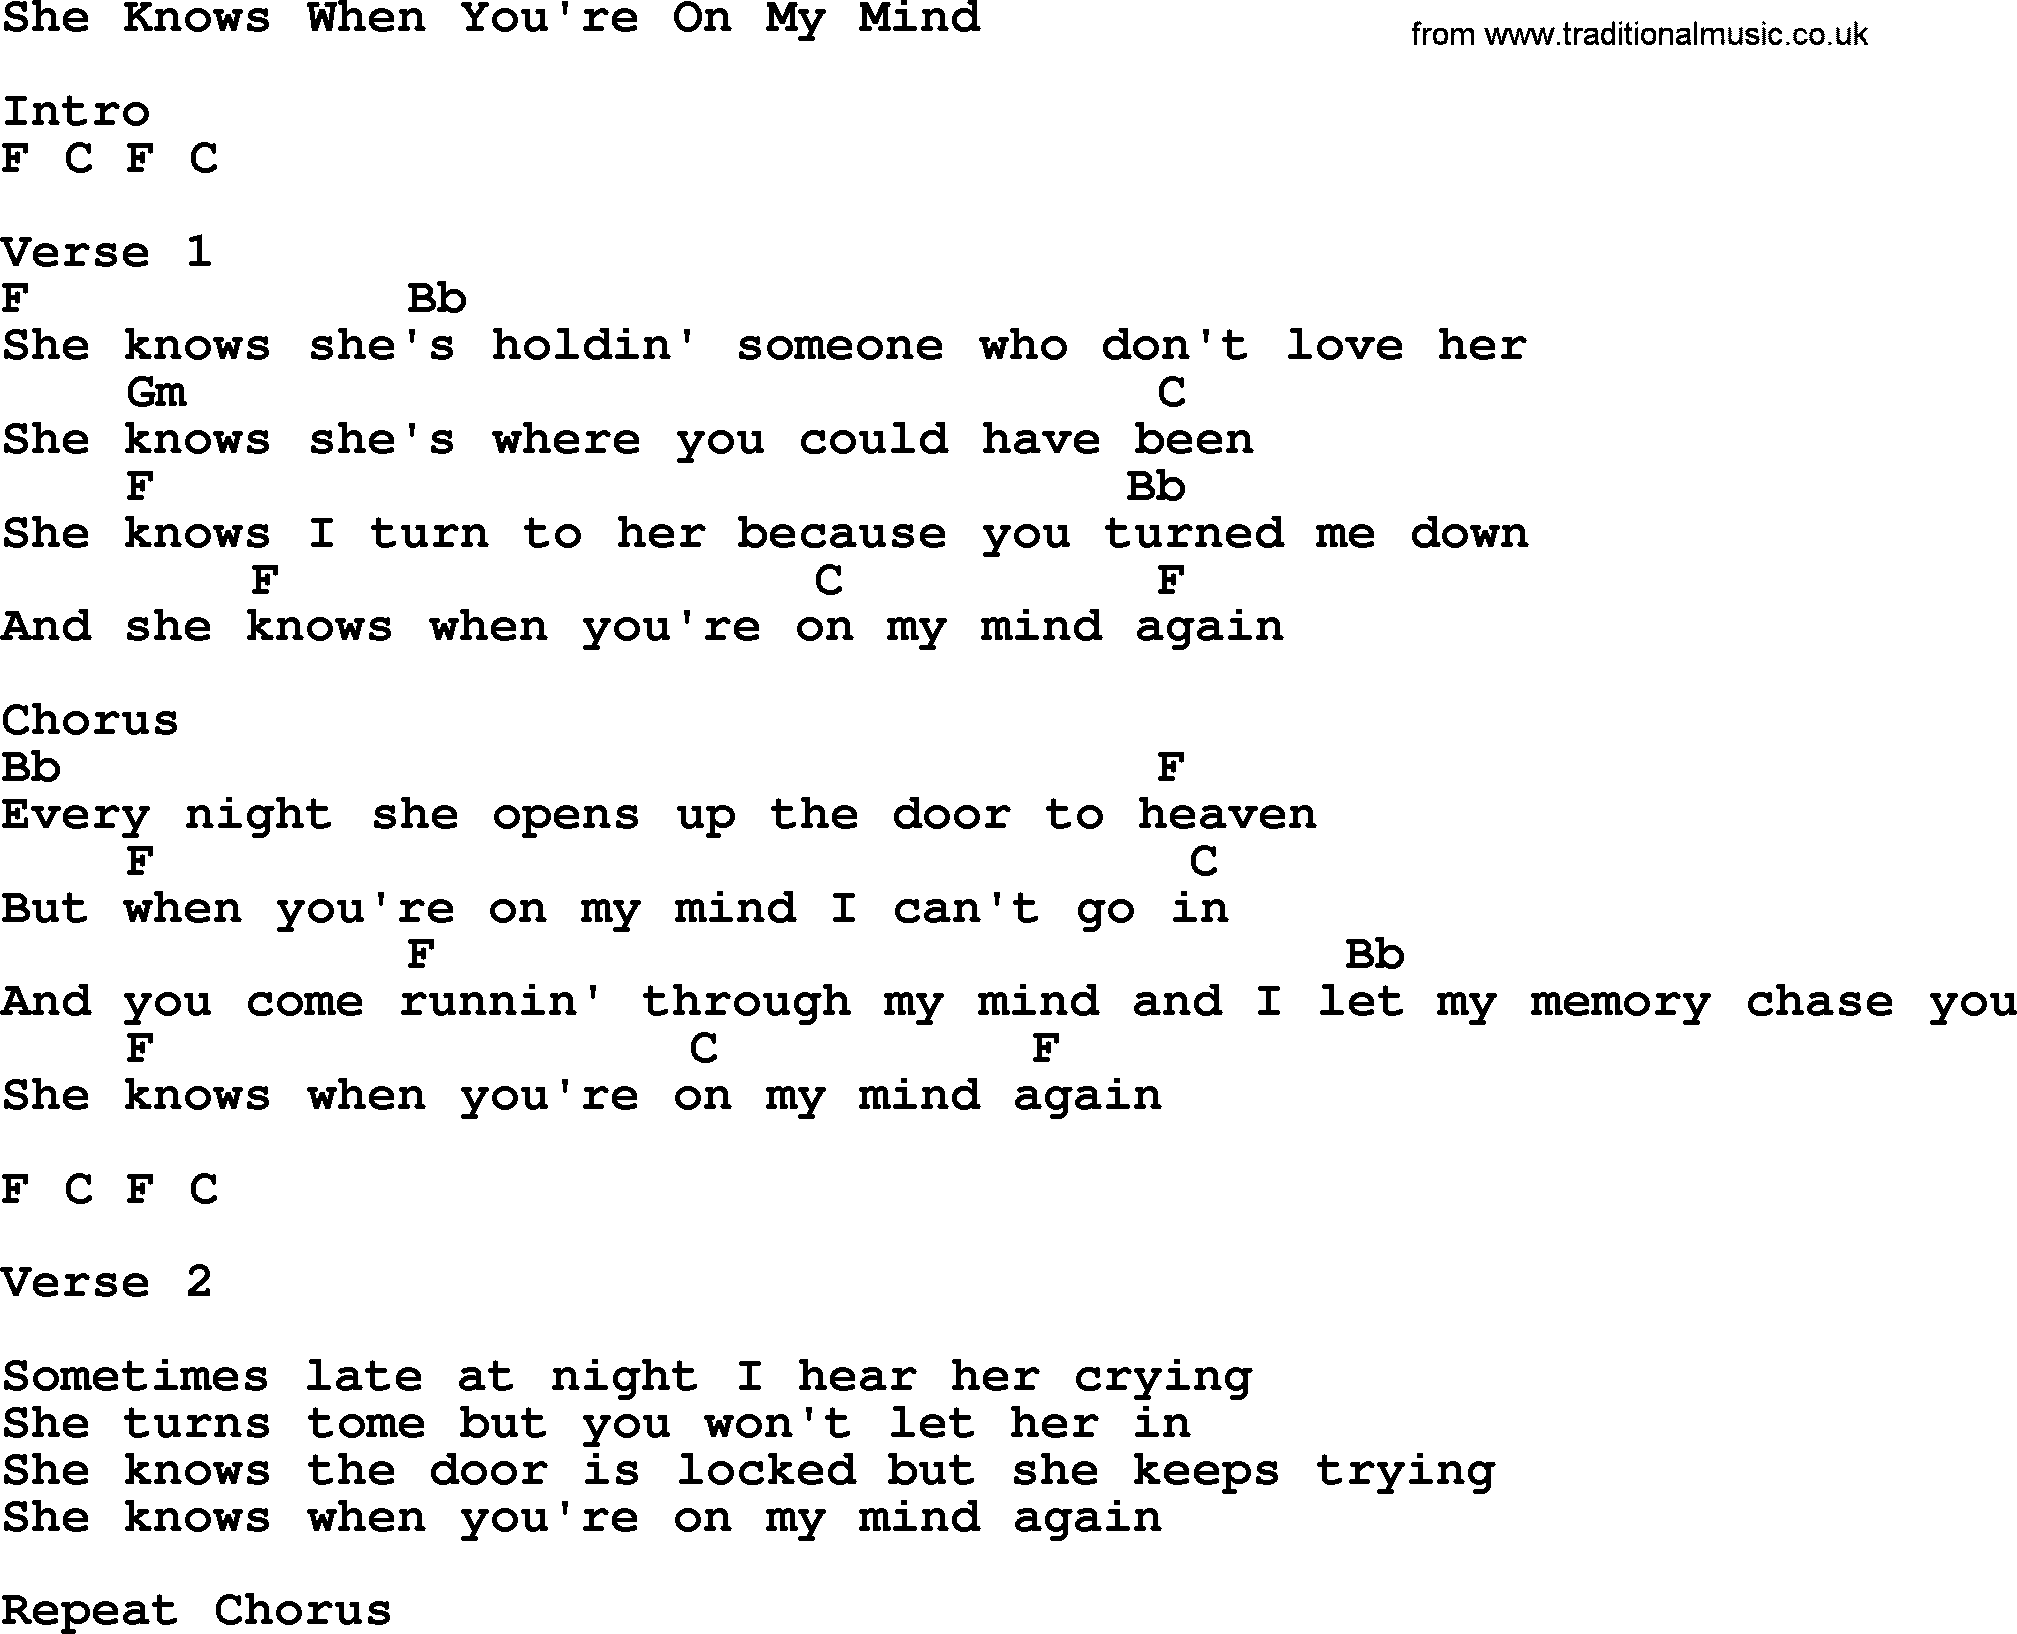 George Strait song: She Knows When You're On My Mind, lyrics and chords